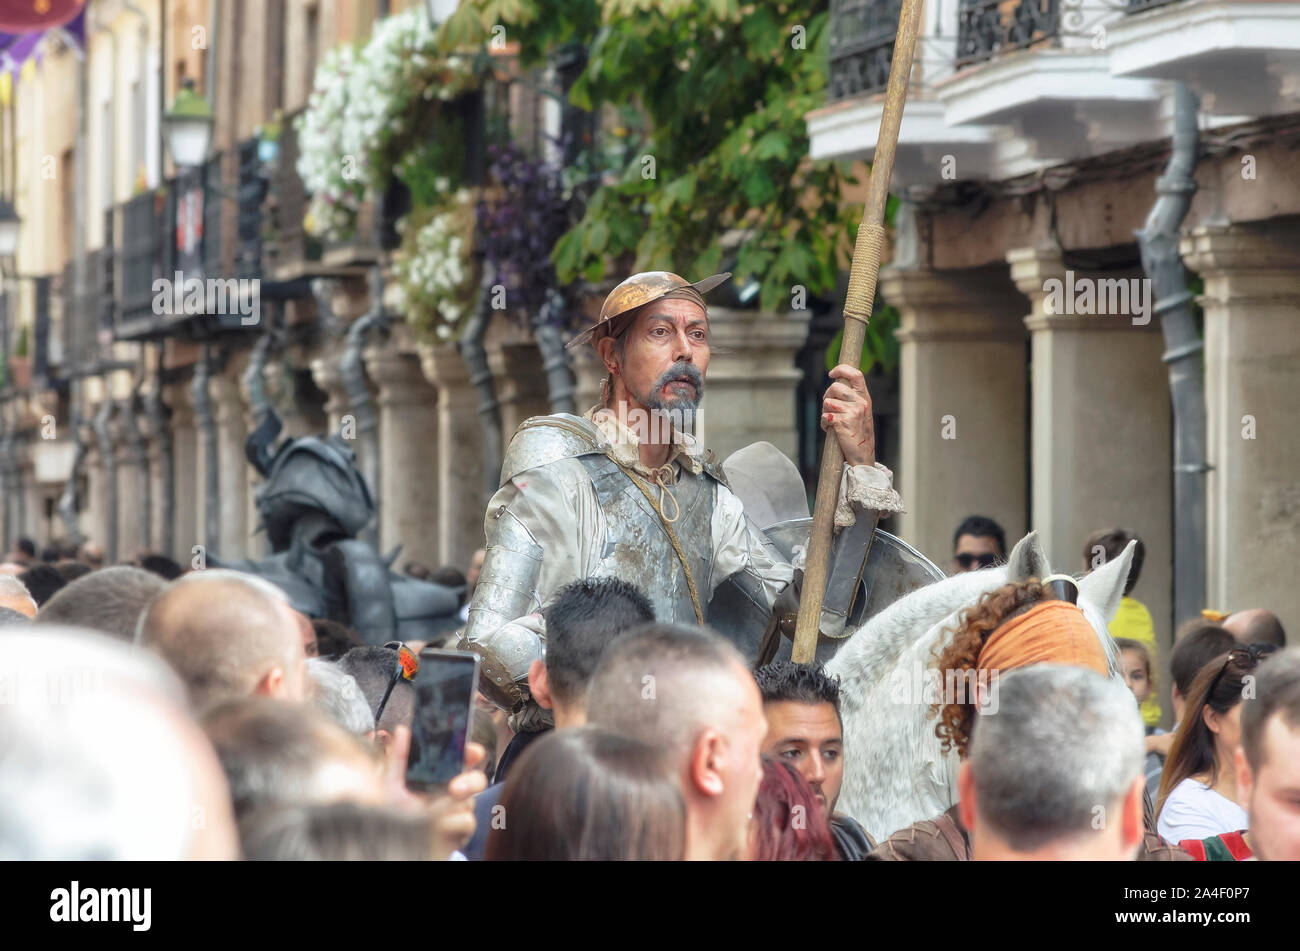 Don Quixote between people, during the week of cervantino medieval street market, in Alcala de Henares (Madrid - Spain), on October 12th 2019. Stock Photo